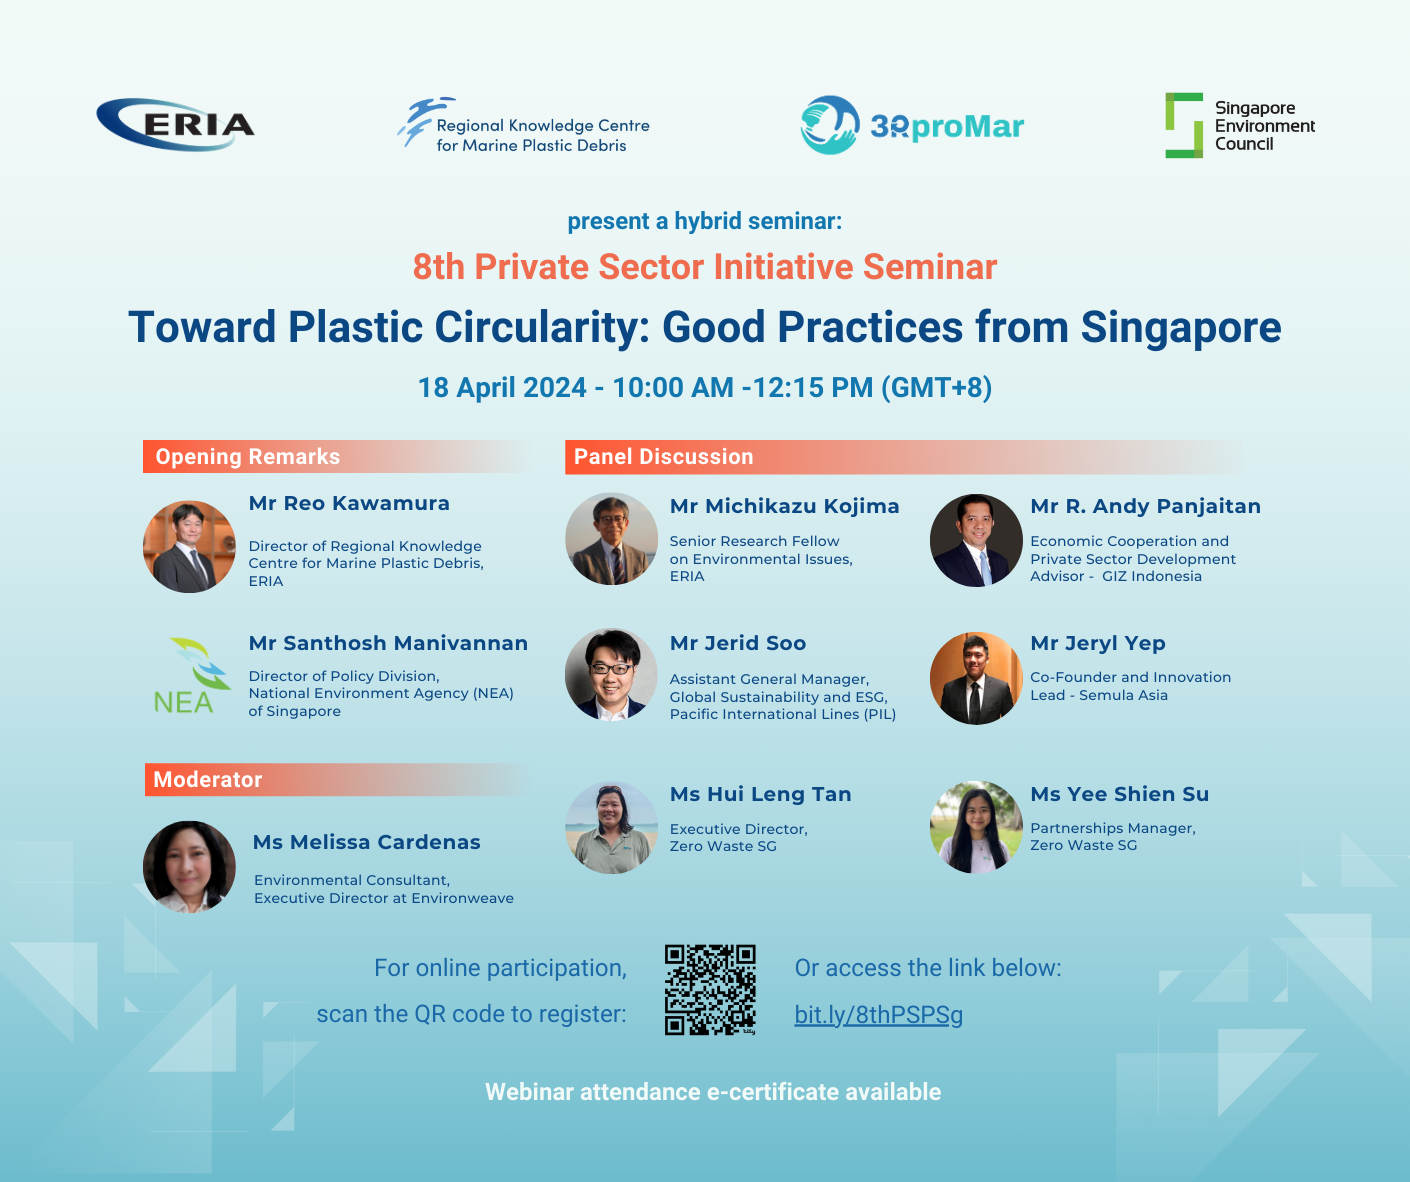 Private Sector Initiatives to Reduce Marine Plastics: Toward Plastic Circularity - Good Practices from Singapore